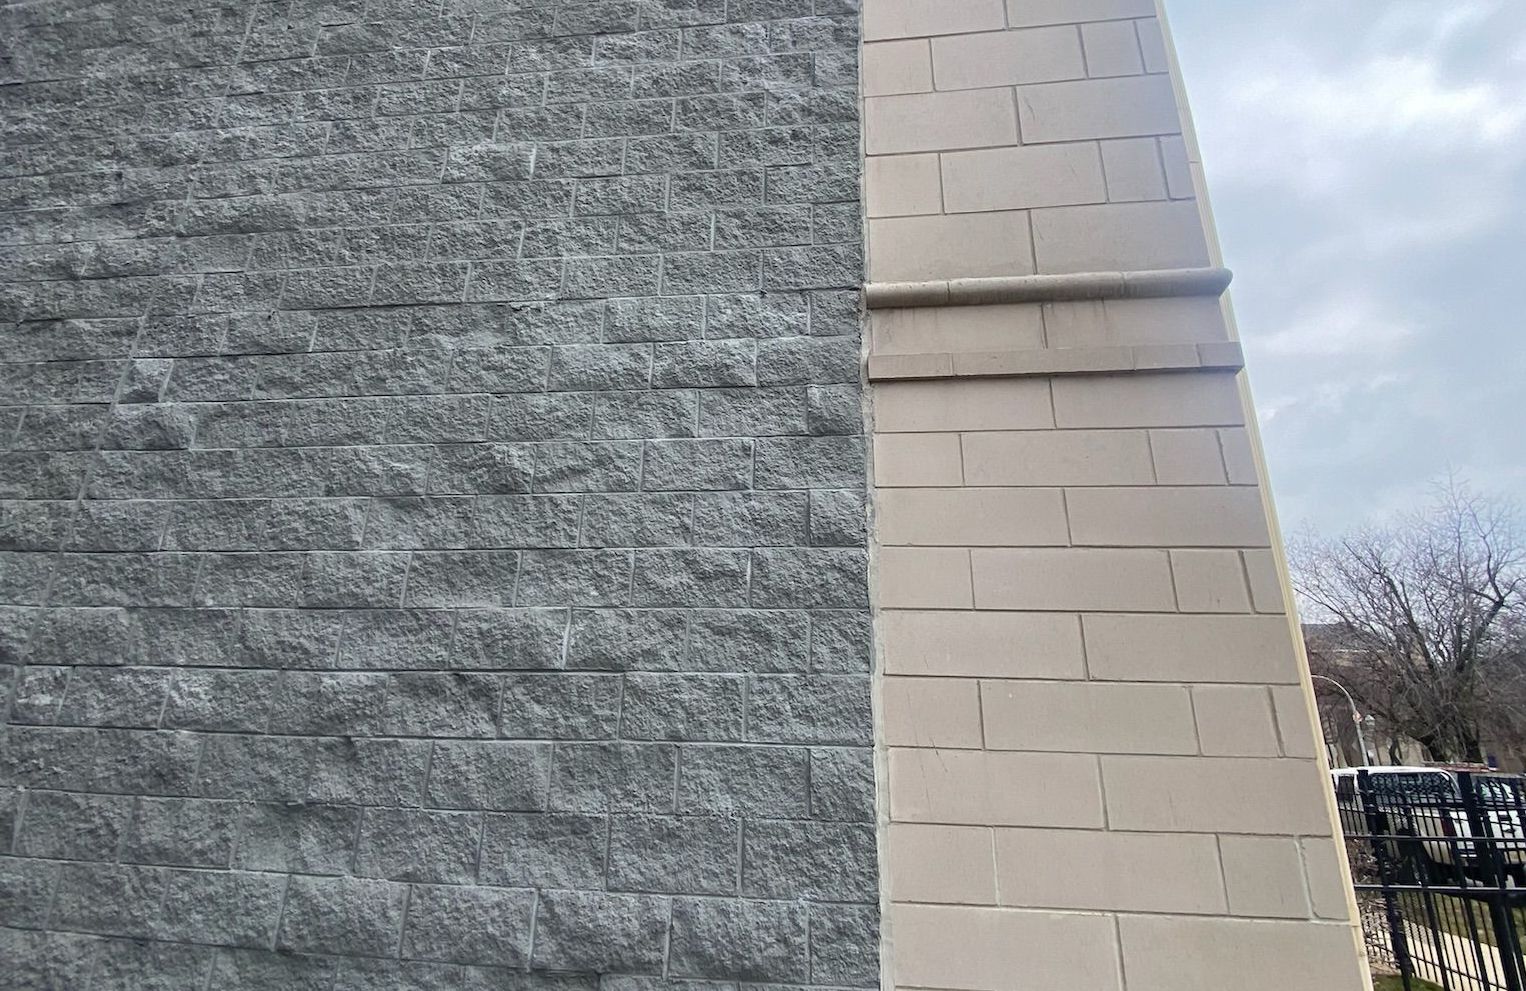 Transition between split face block and Renaissance sections of a building's wall in Bronzeville, Chicago